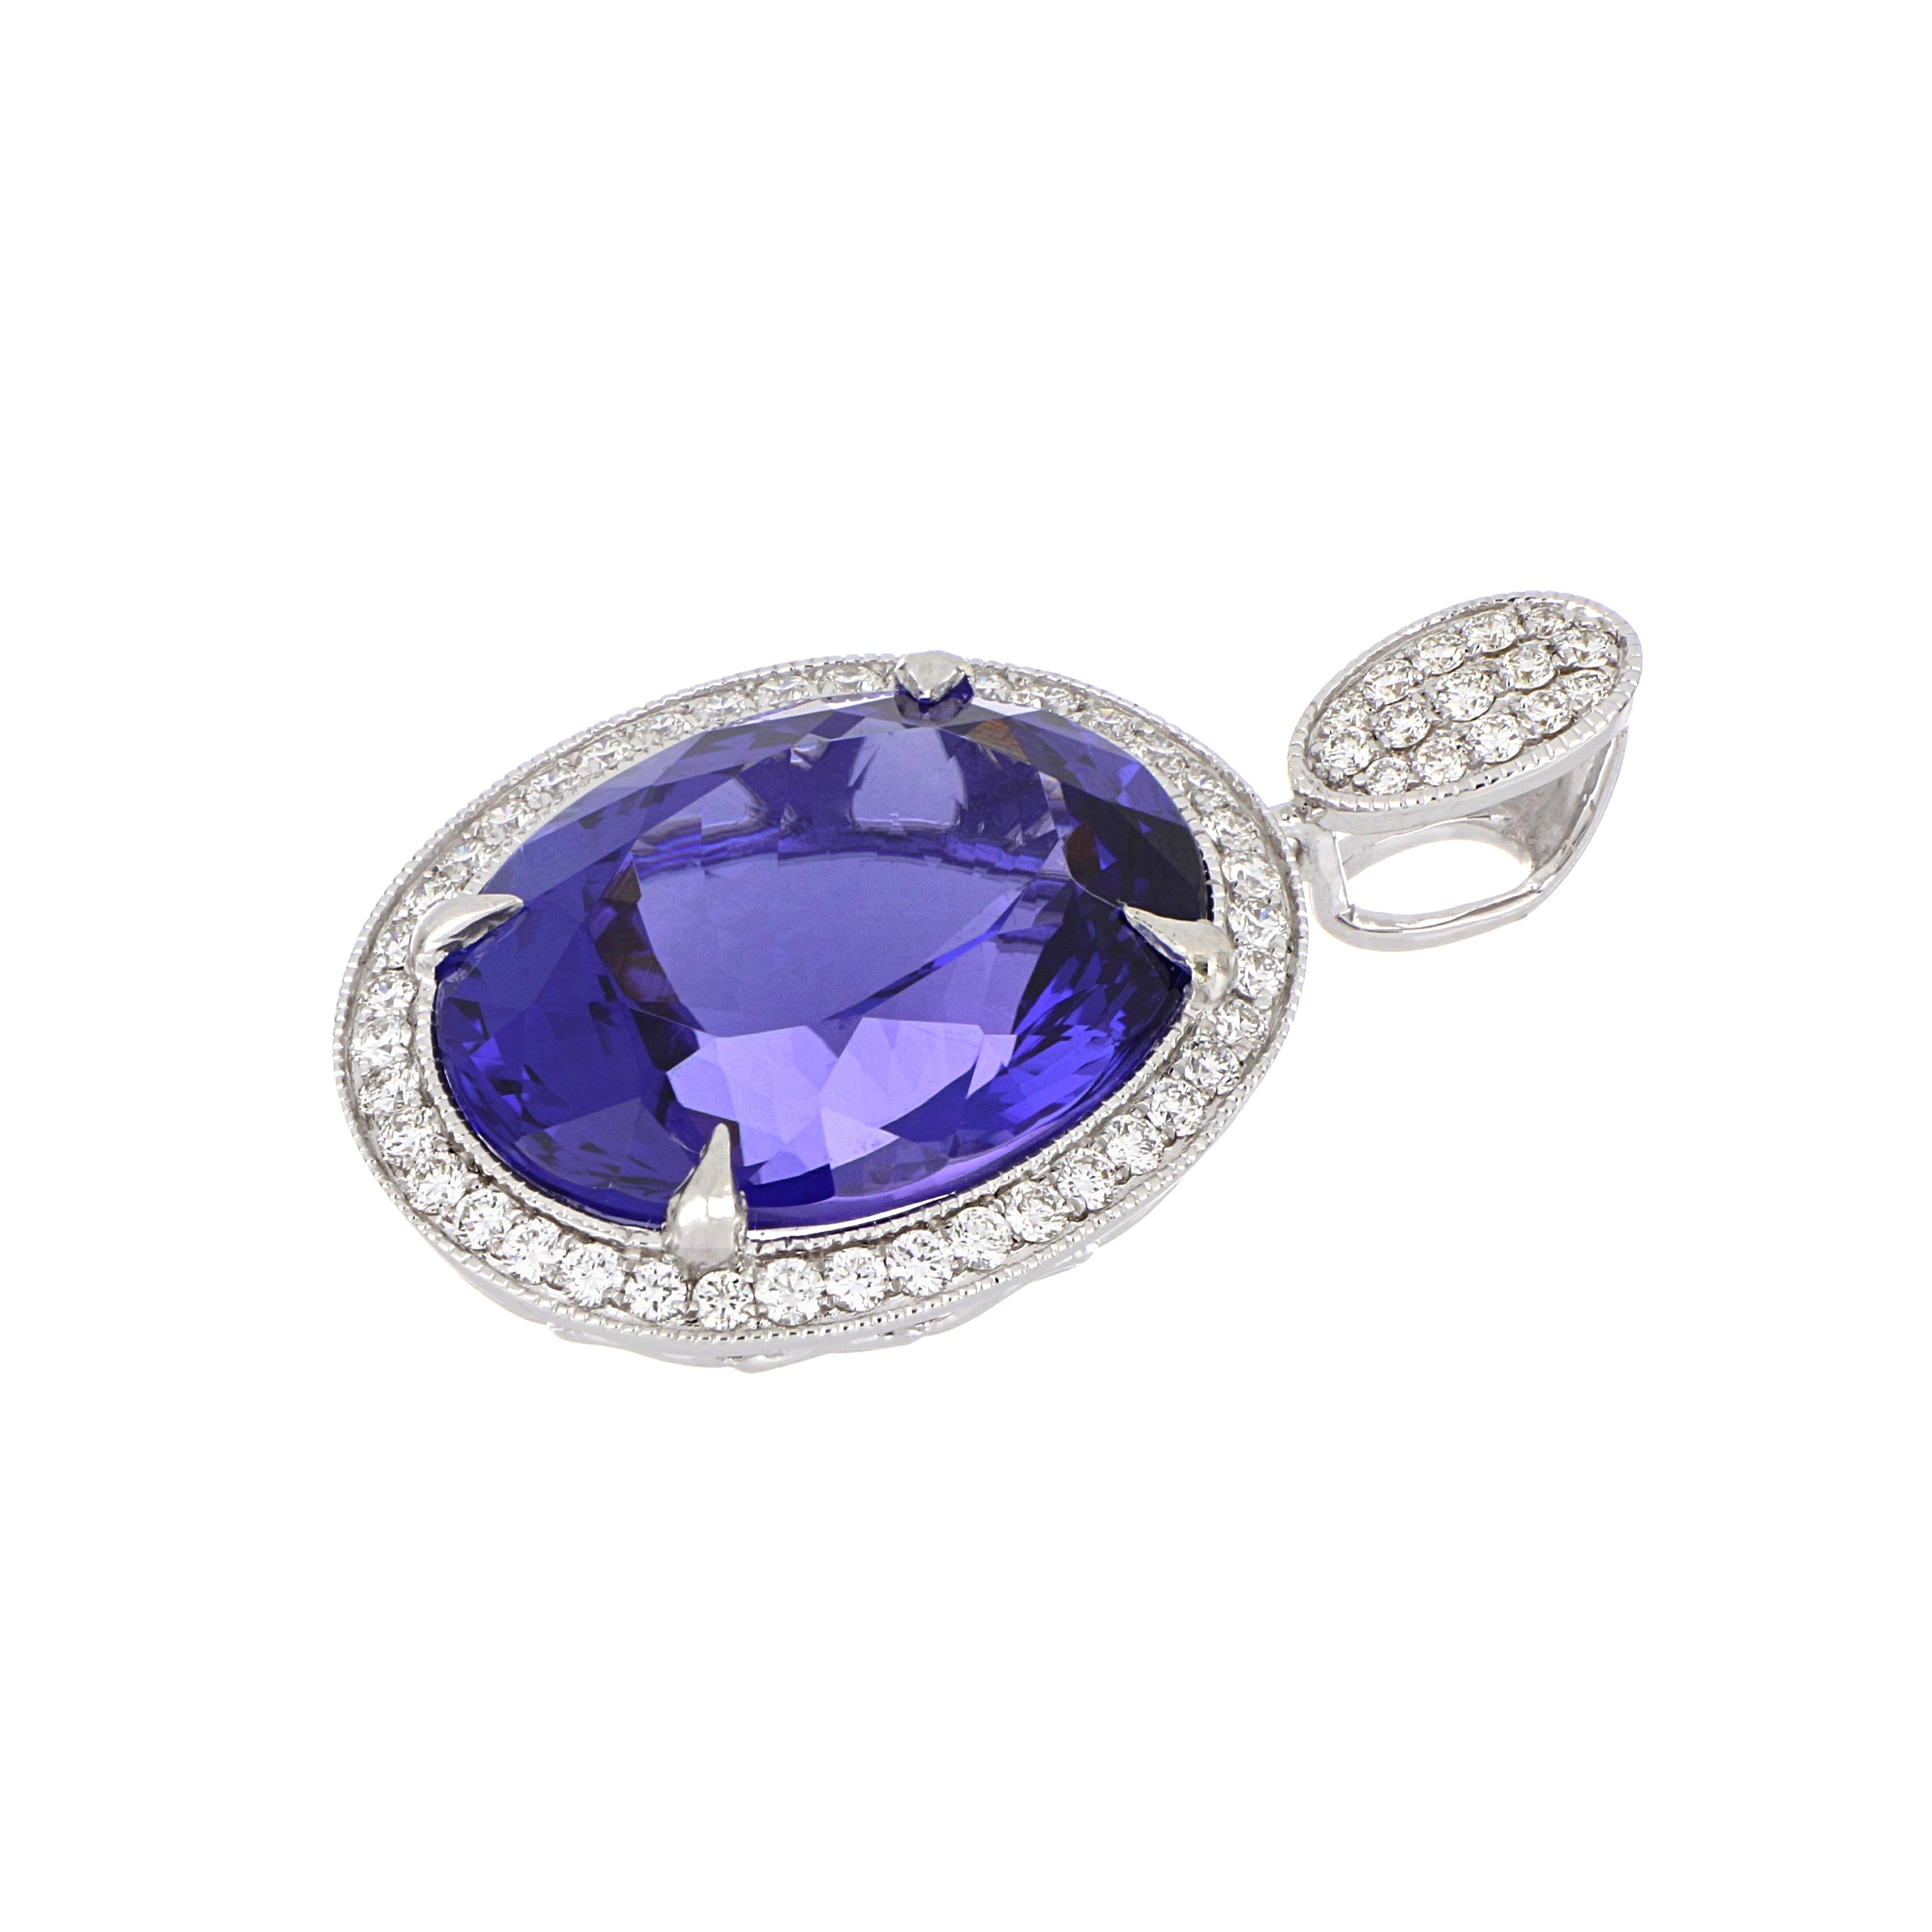 Elegant and exquisitely detailed Gold Pendant, centre set with 11.54 Ct Tanzanite, surrounded by micro pave Diamonds in Halo, weighing approx. 0.44 total carat weight. Beautifully Hand crafted in 18 Karat white Gold.

Stone Size: 16 x 12.7